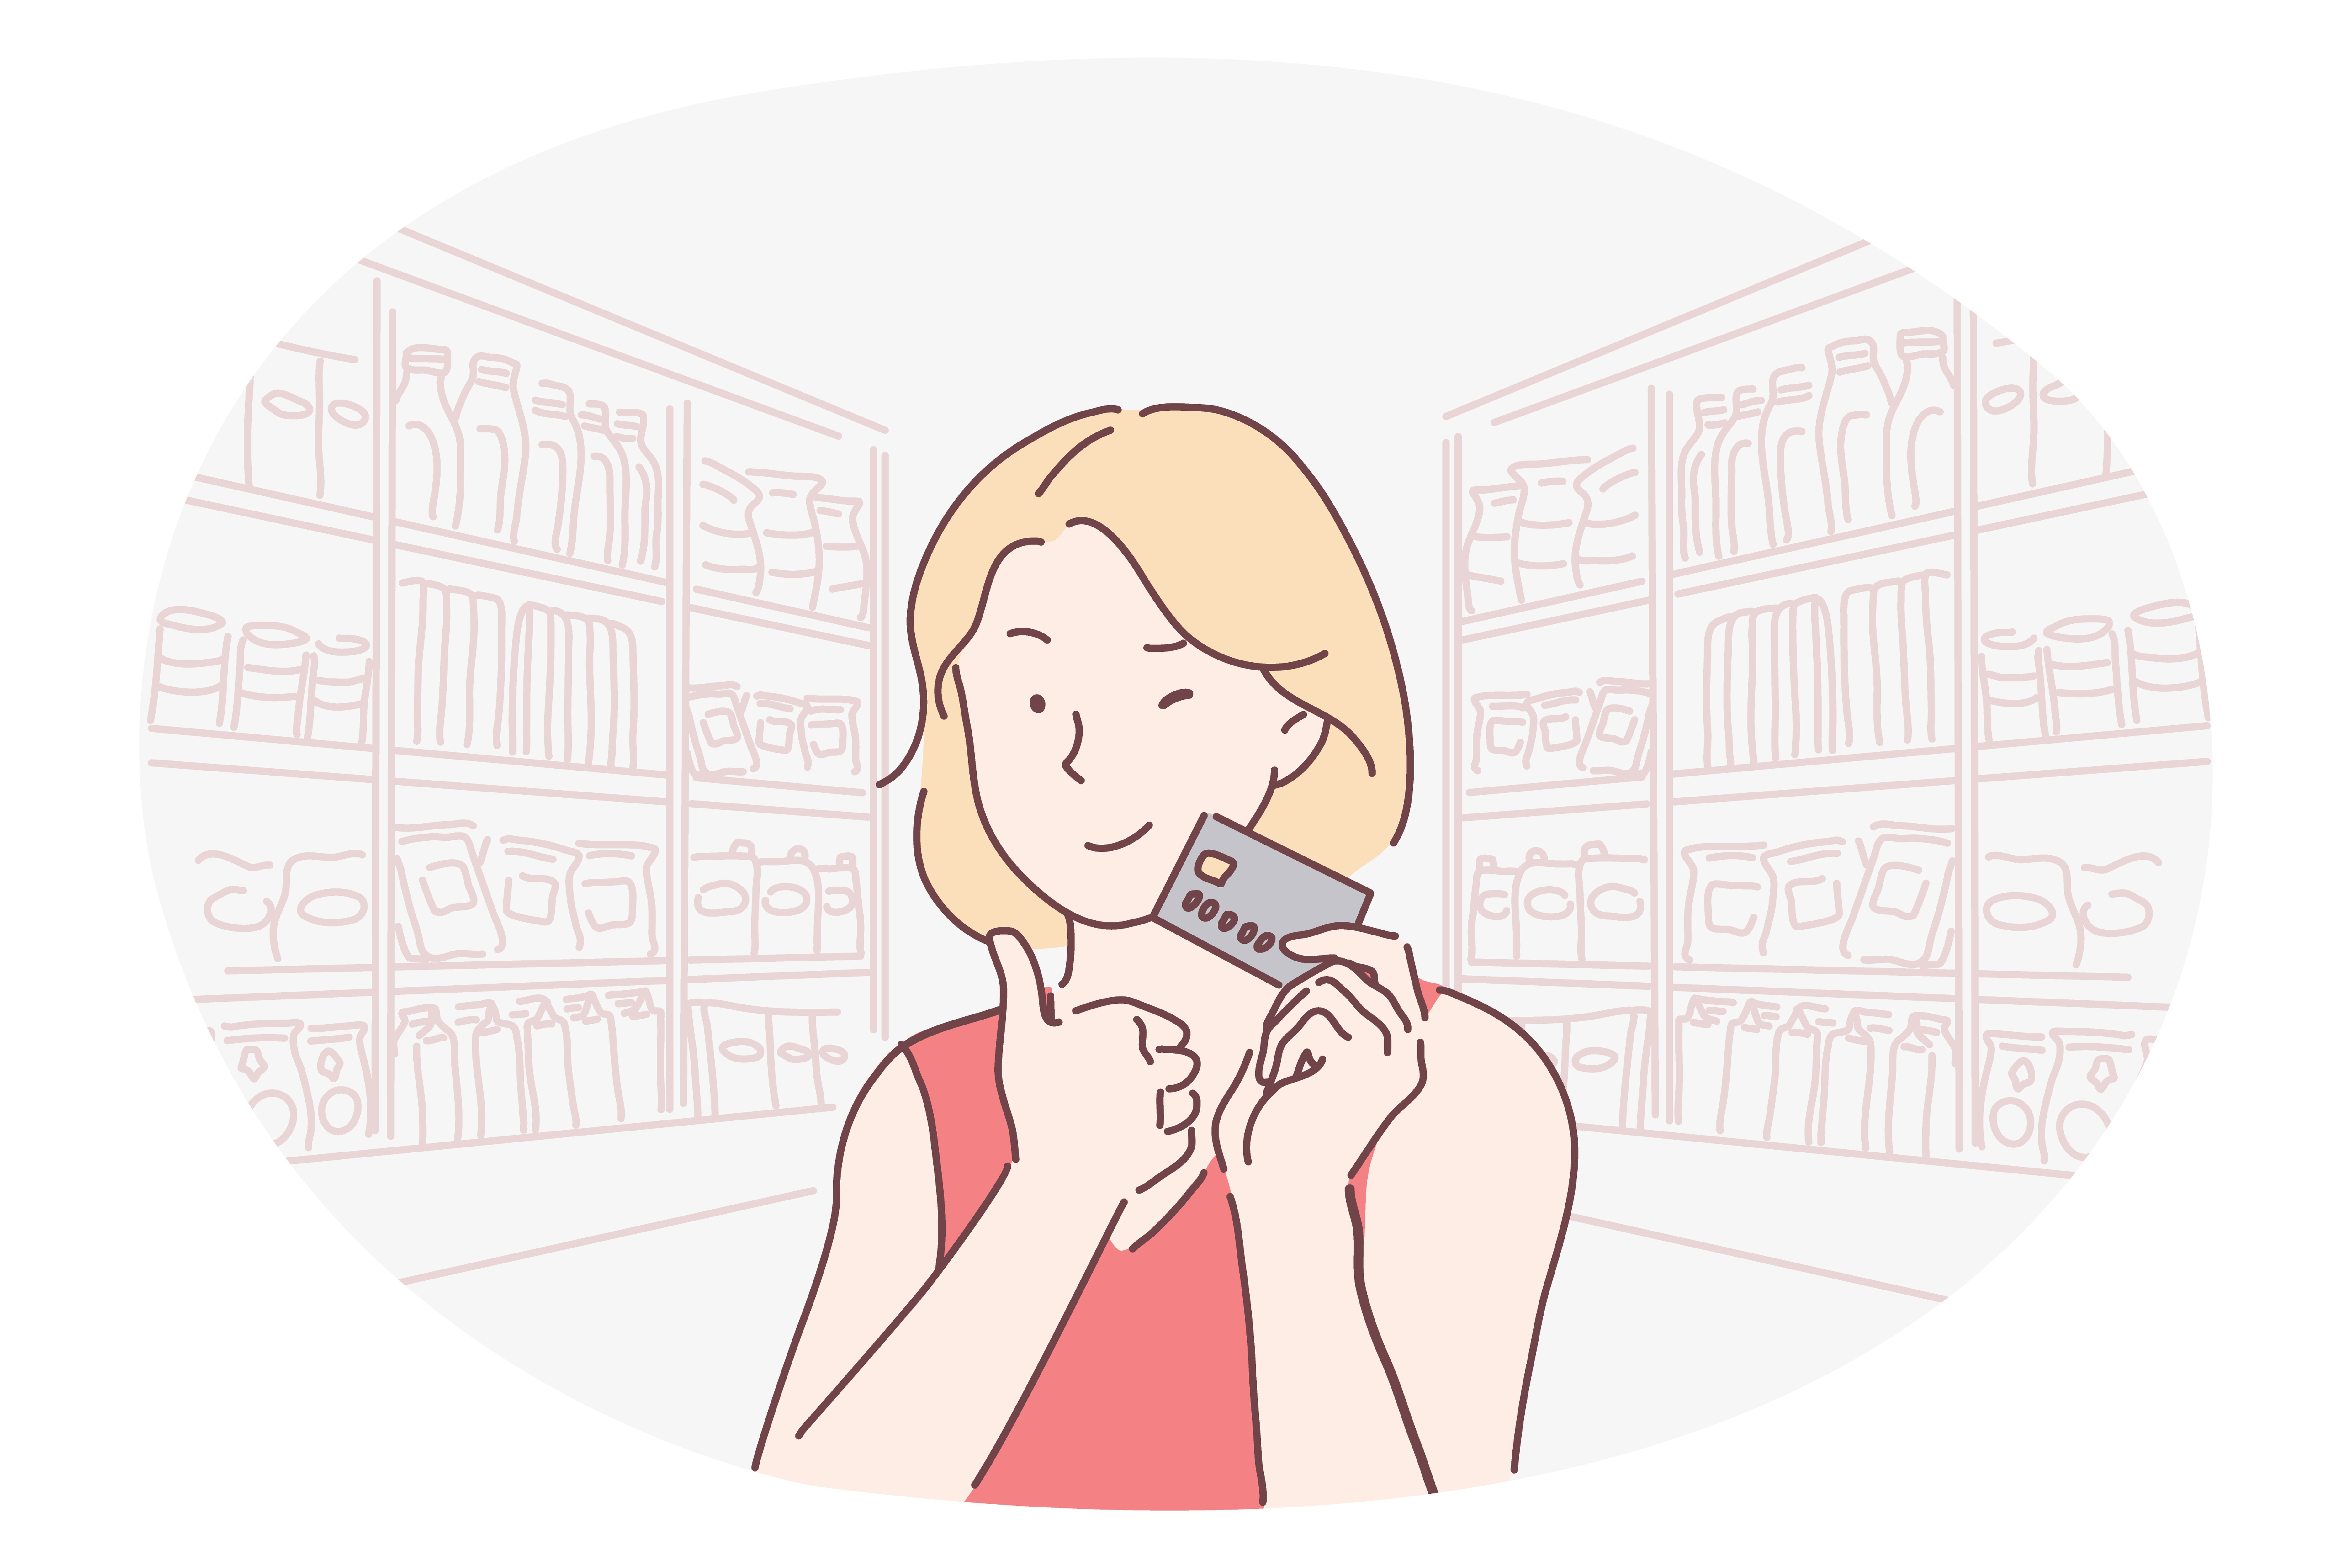 Credit card, paying, shopping, online banking, purchase, buying, customer concept. Young smiling woman cartoon character holding credit card in hands and showing thumbs up during shopping alone. Credit card, paying, shopping, online banking, purchase, buying, customer concept